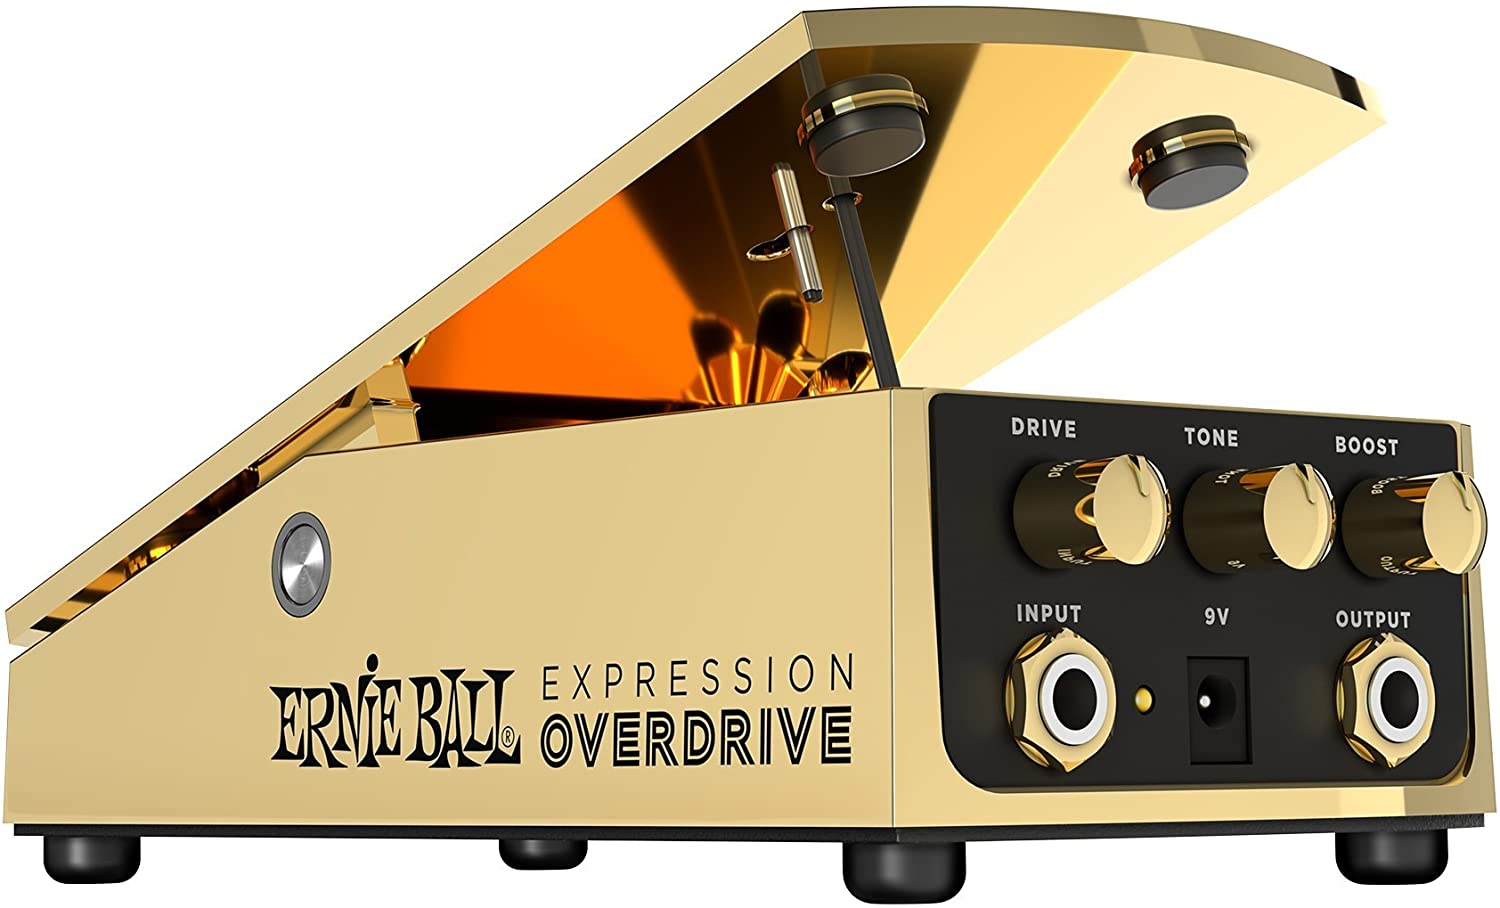 Pedal Ernie Ball Expression Overdrive